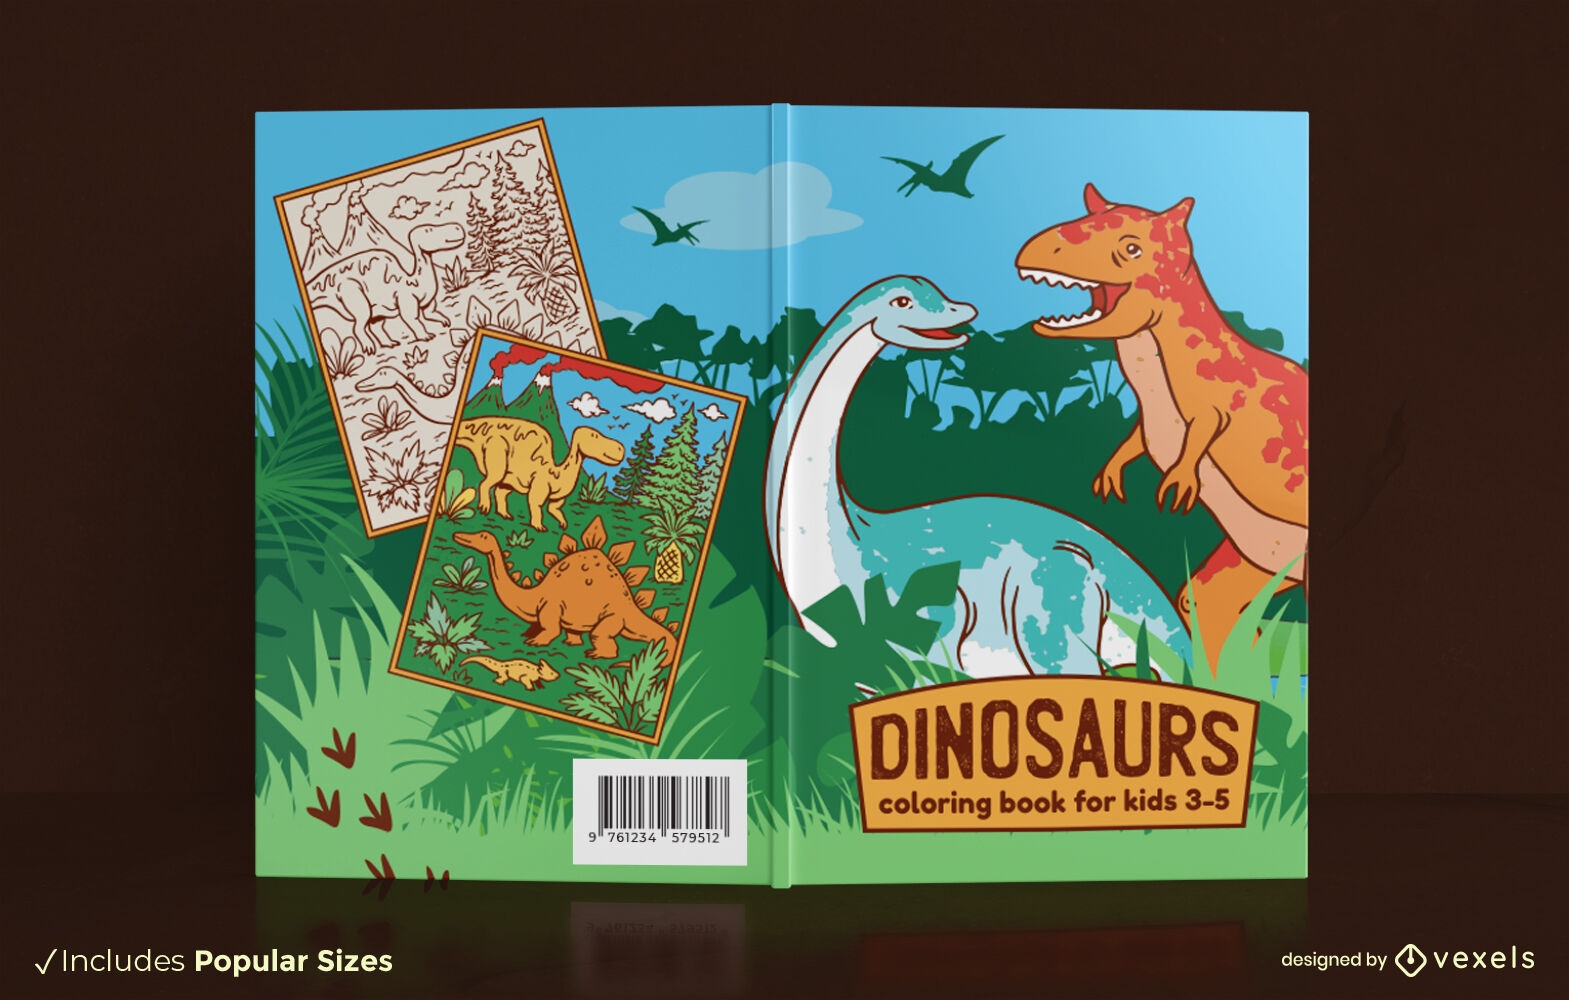 Dinosaurs coloring for kids book cover